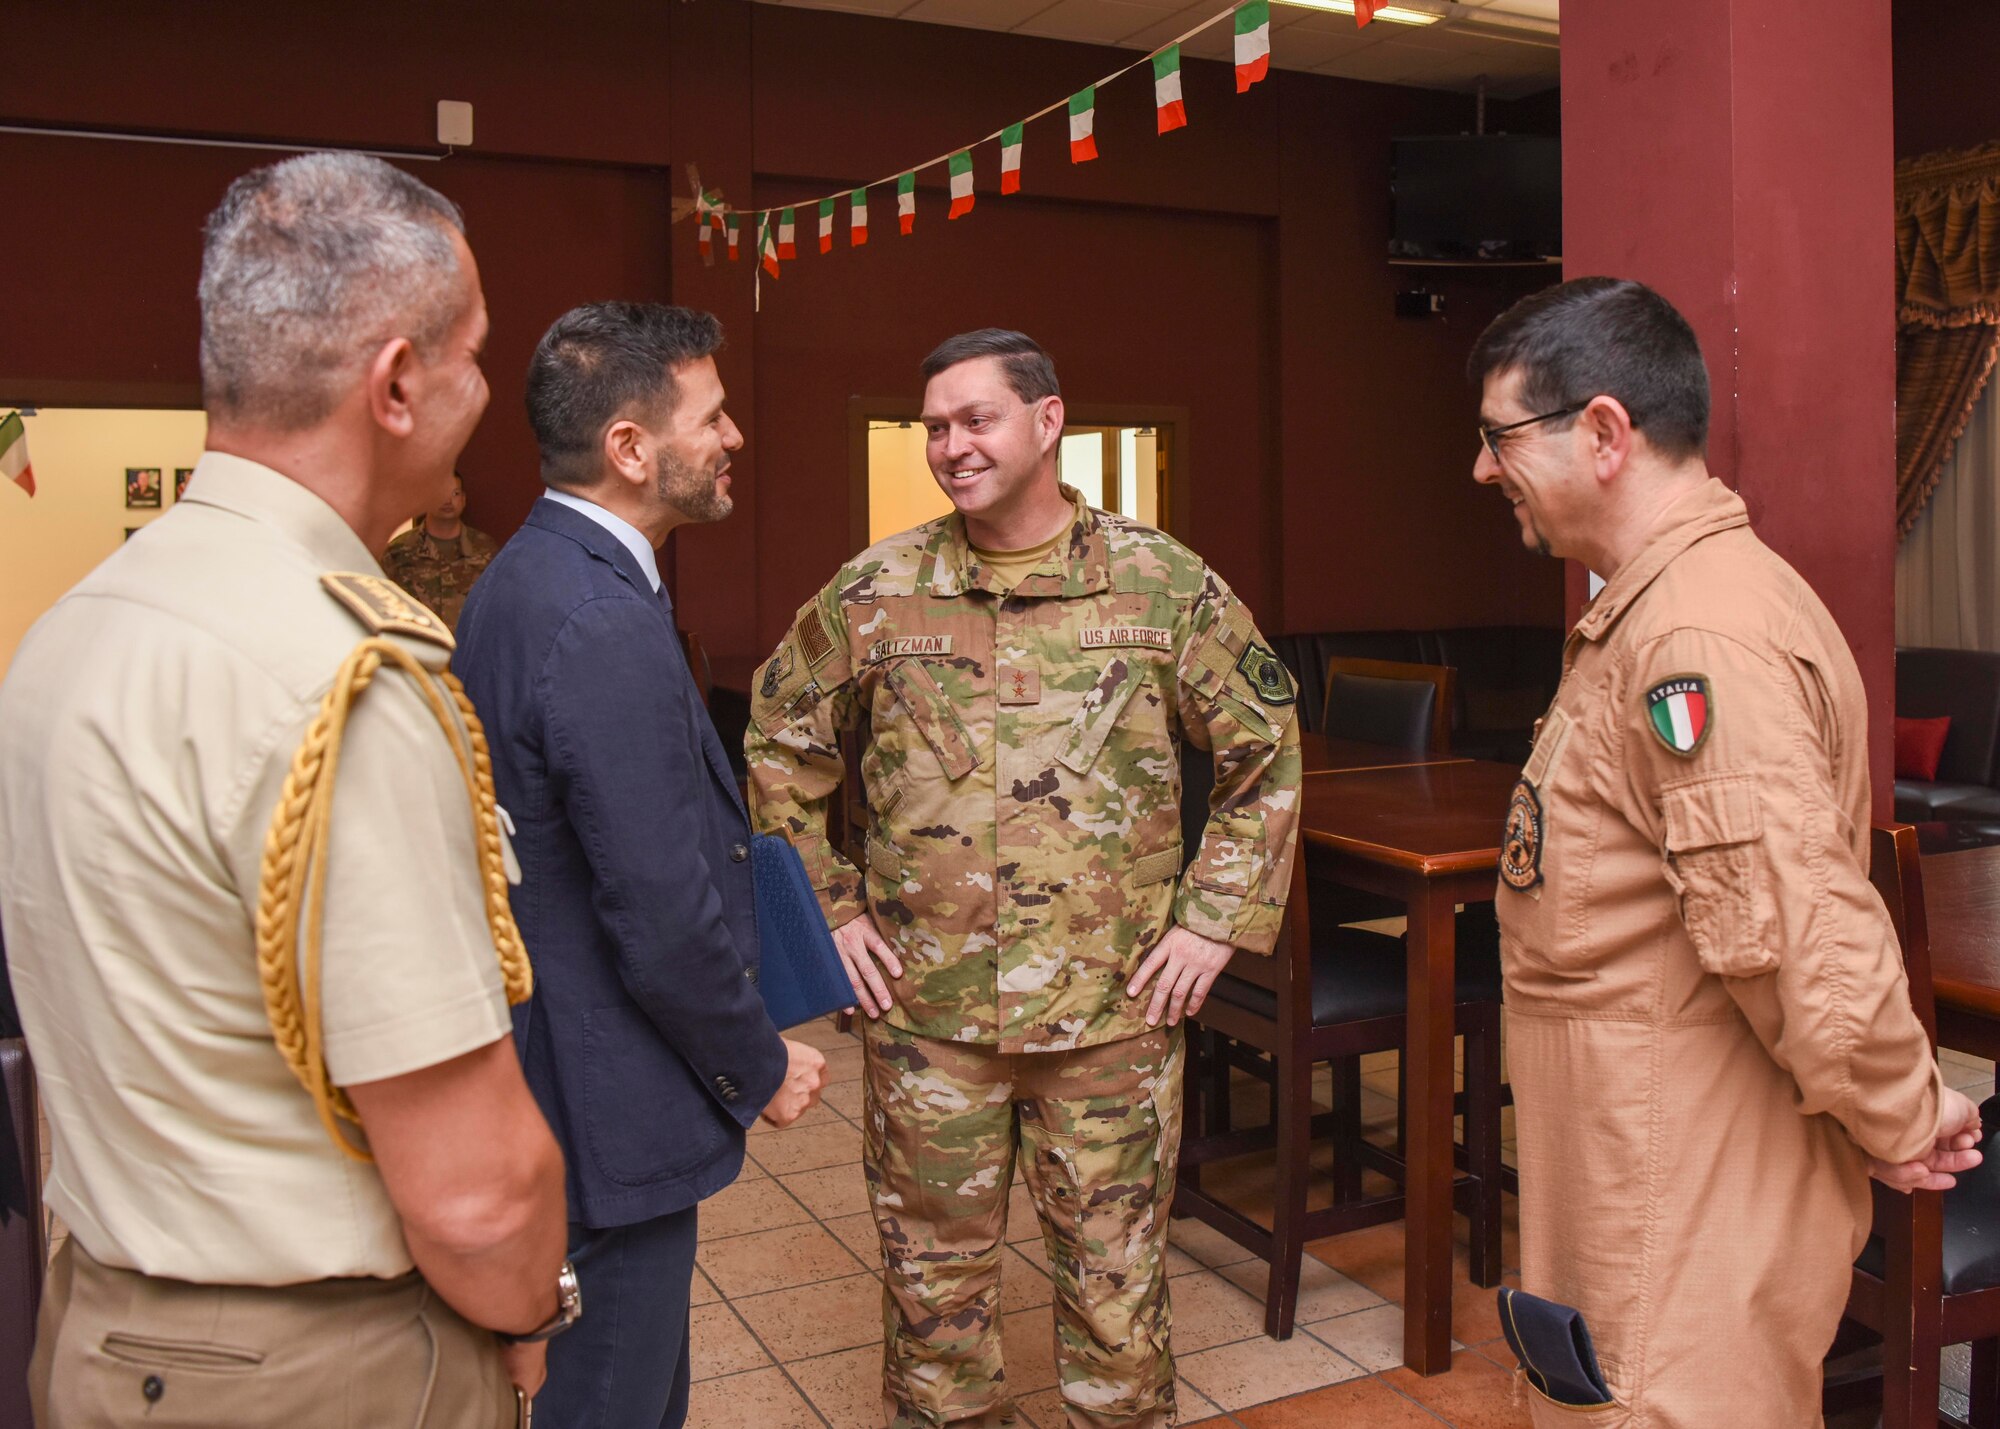 U.S. Air Force Maj. Gen. B. Chance Saltzman, U.S. Air Forces Central Command deputy Combined Force Air Component Commander, speaks with Italian leaders and military members during an Italian National Day celebration at Al Udeid Air Base, Qatar, June 8, 2019.